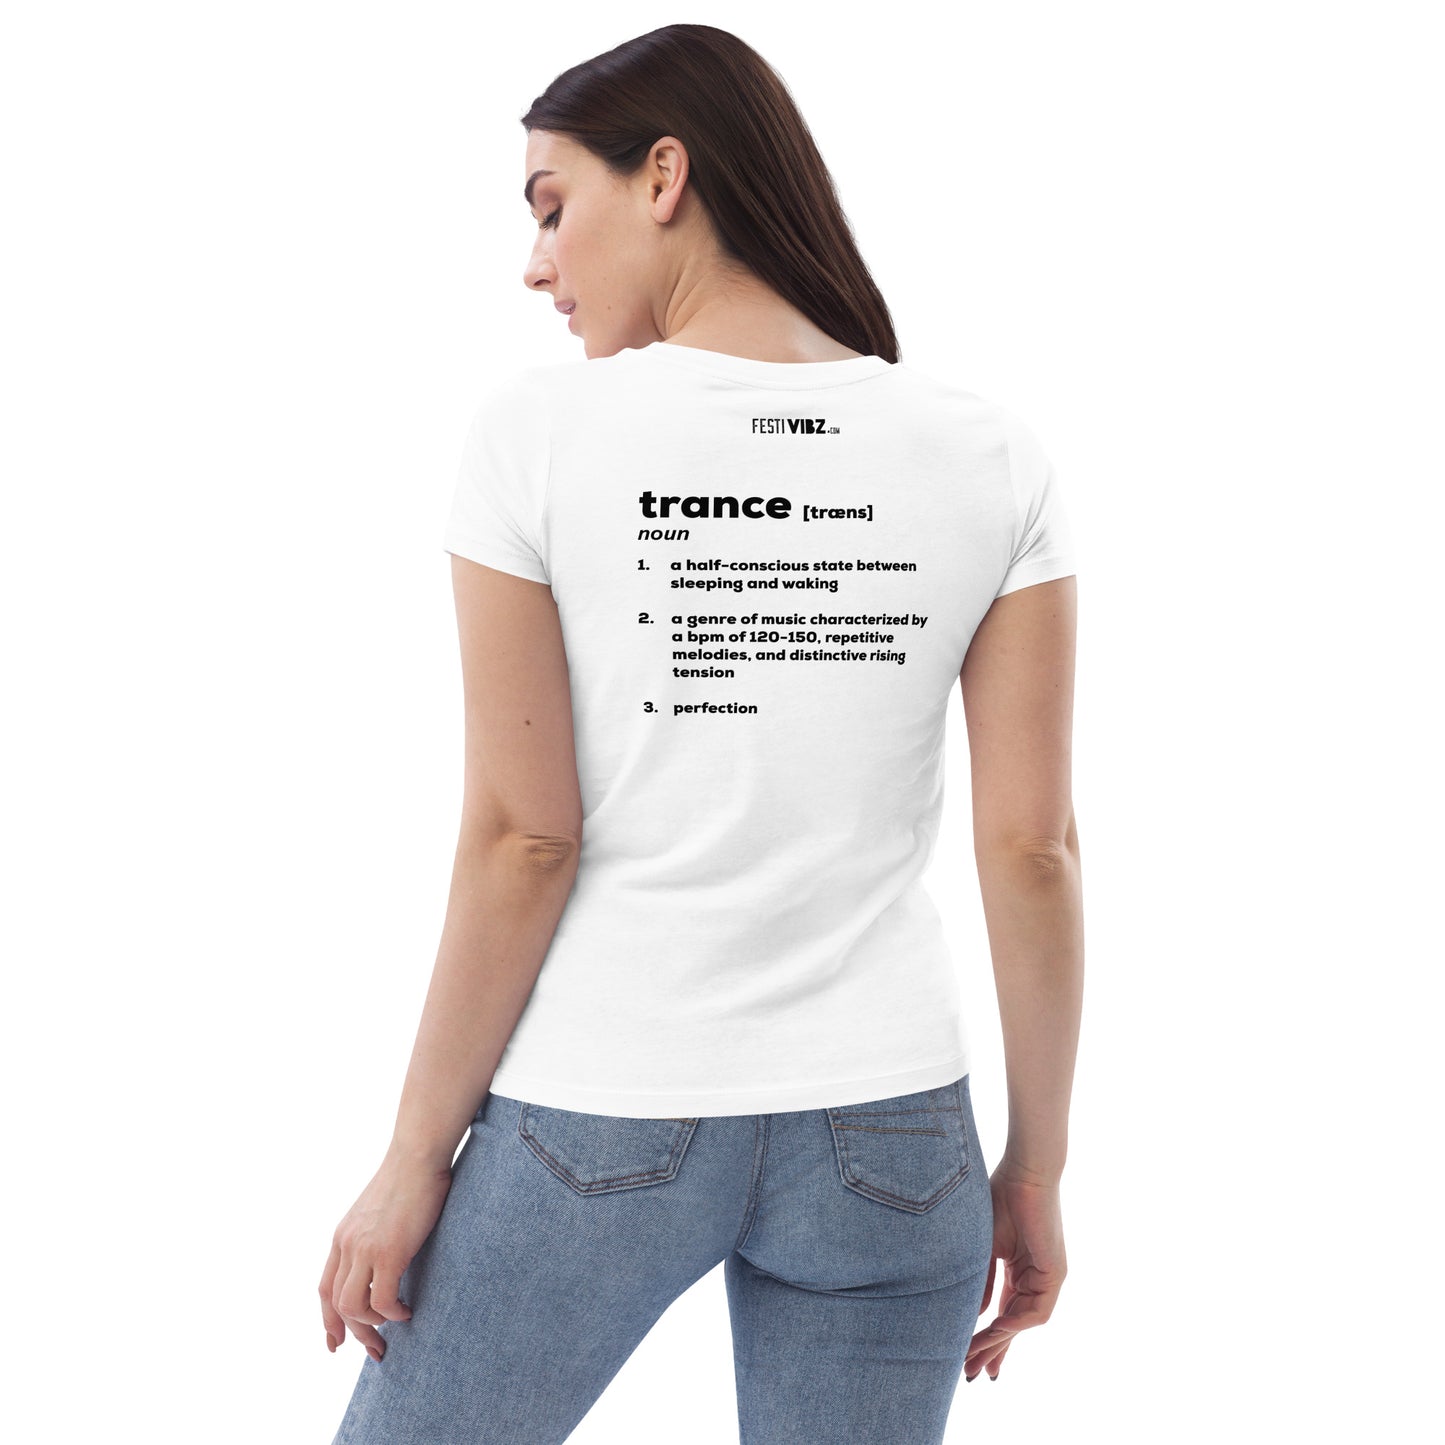 Trance (definition) - Women's Fitted T-Shirt